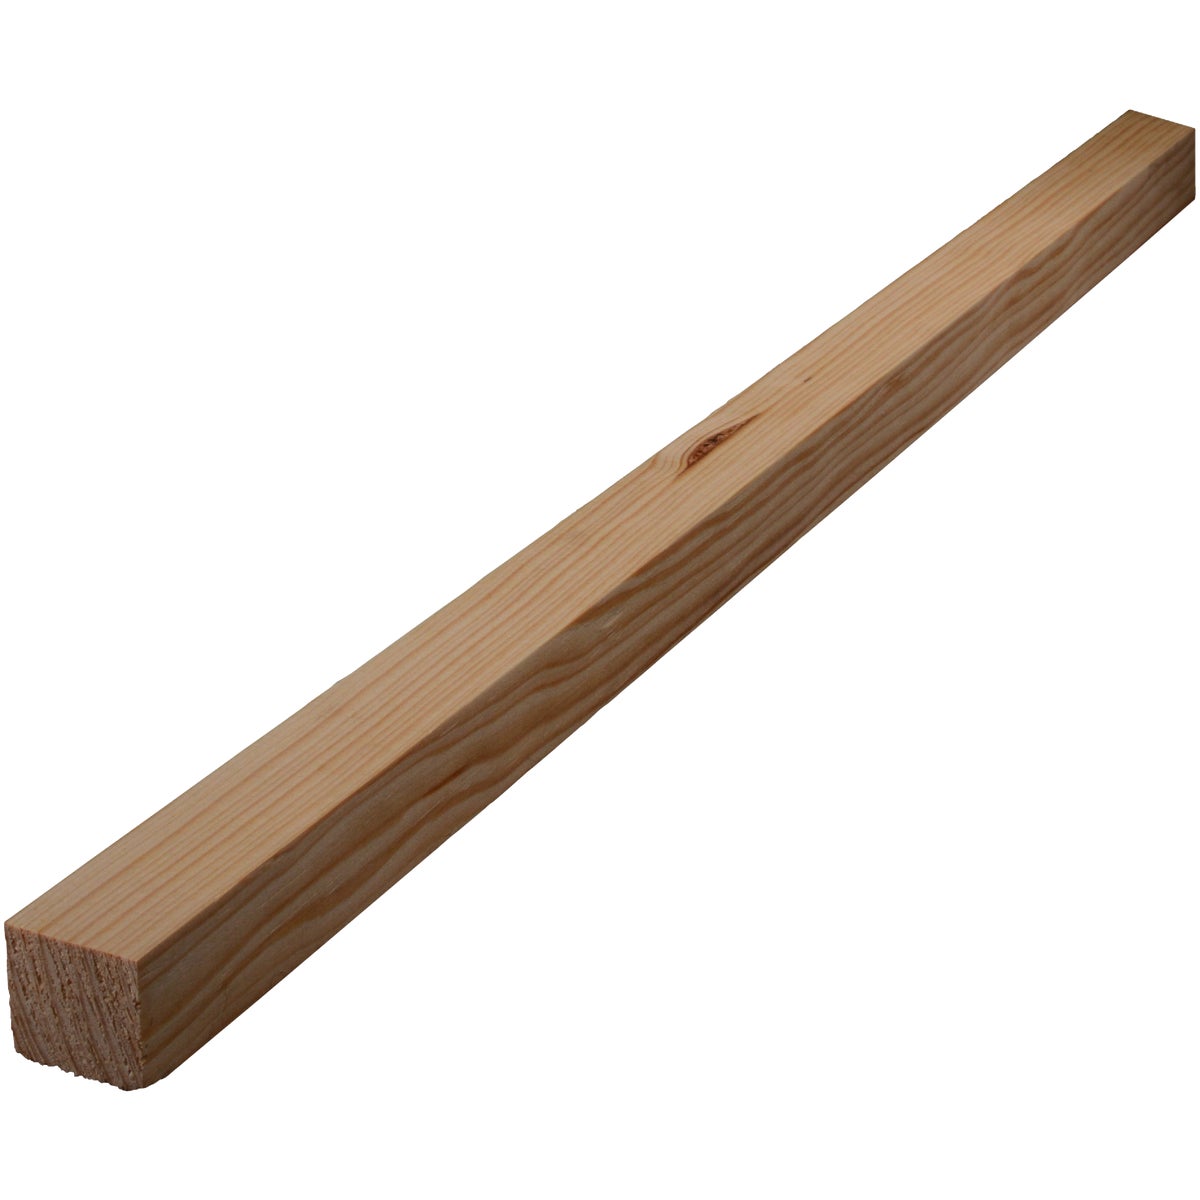 Alexandria Moulding 1-1/16 In. W. x 1-1/16 In. H. x 8 Ft. L. Solid Pine Square Molding